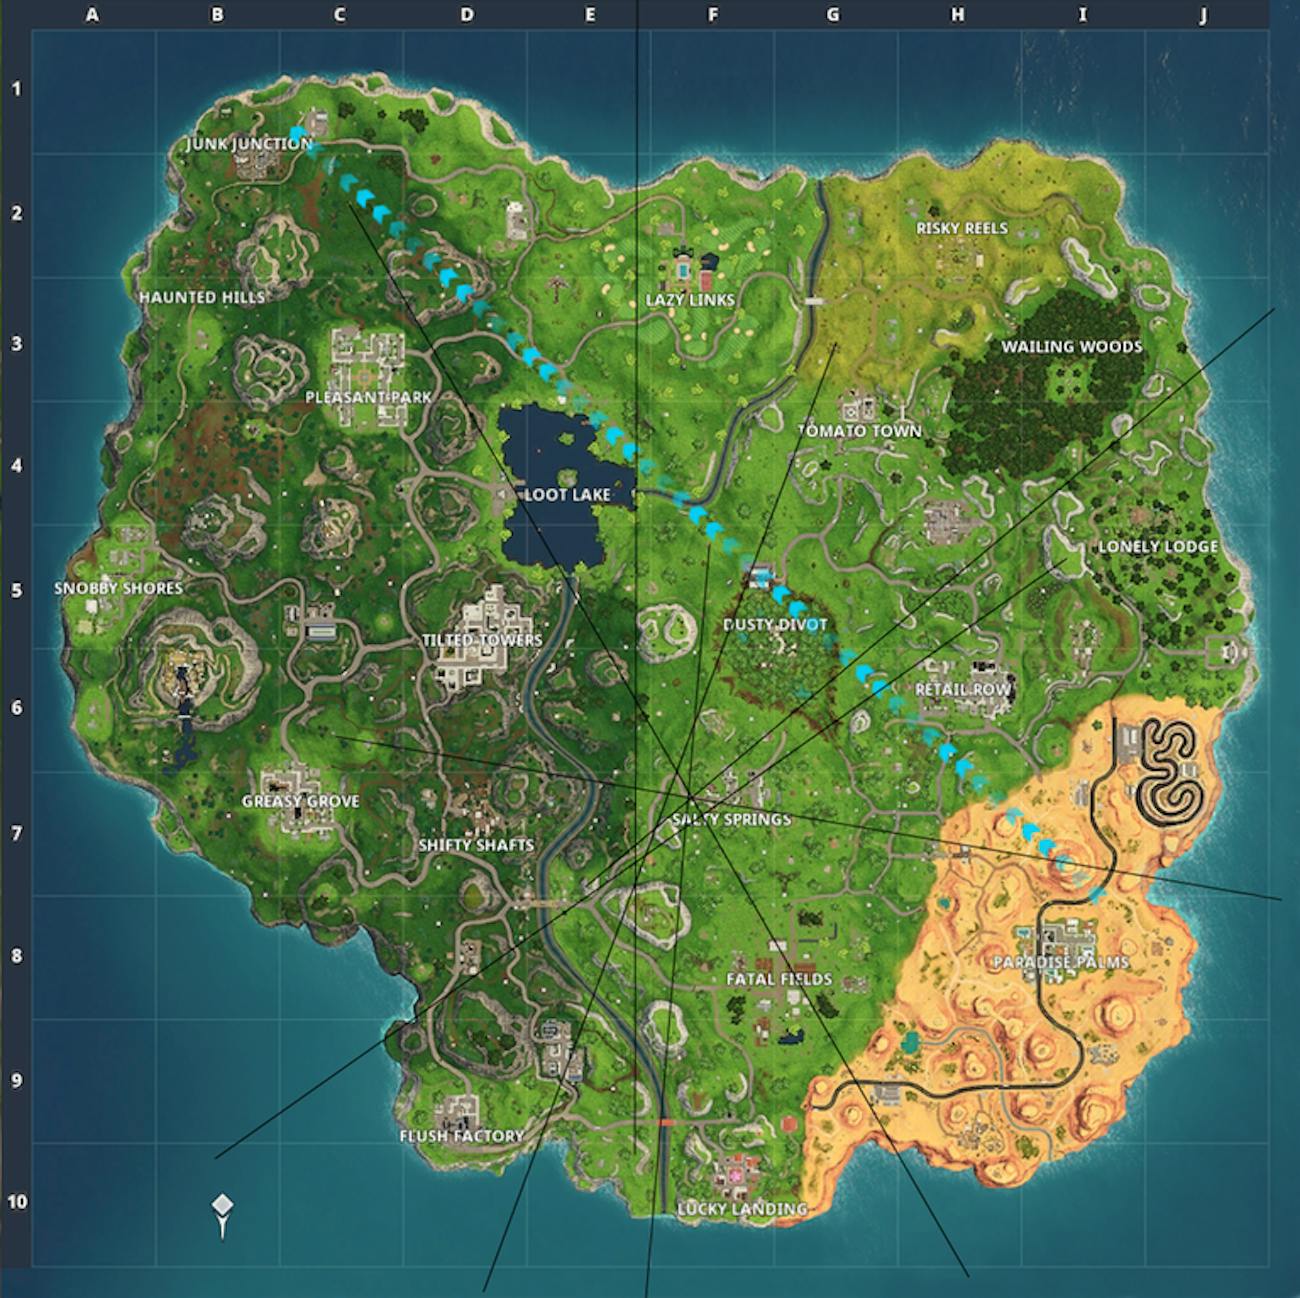 the stone heads all face salty springs - all weekly challenges fortnite